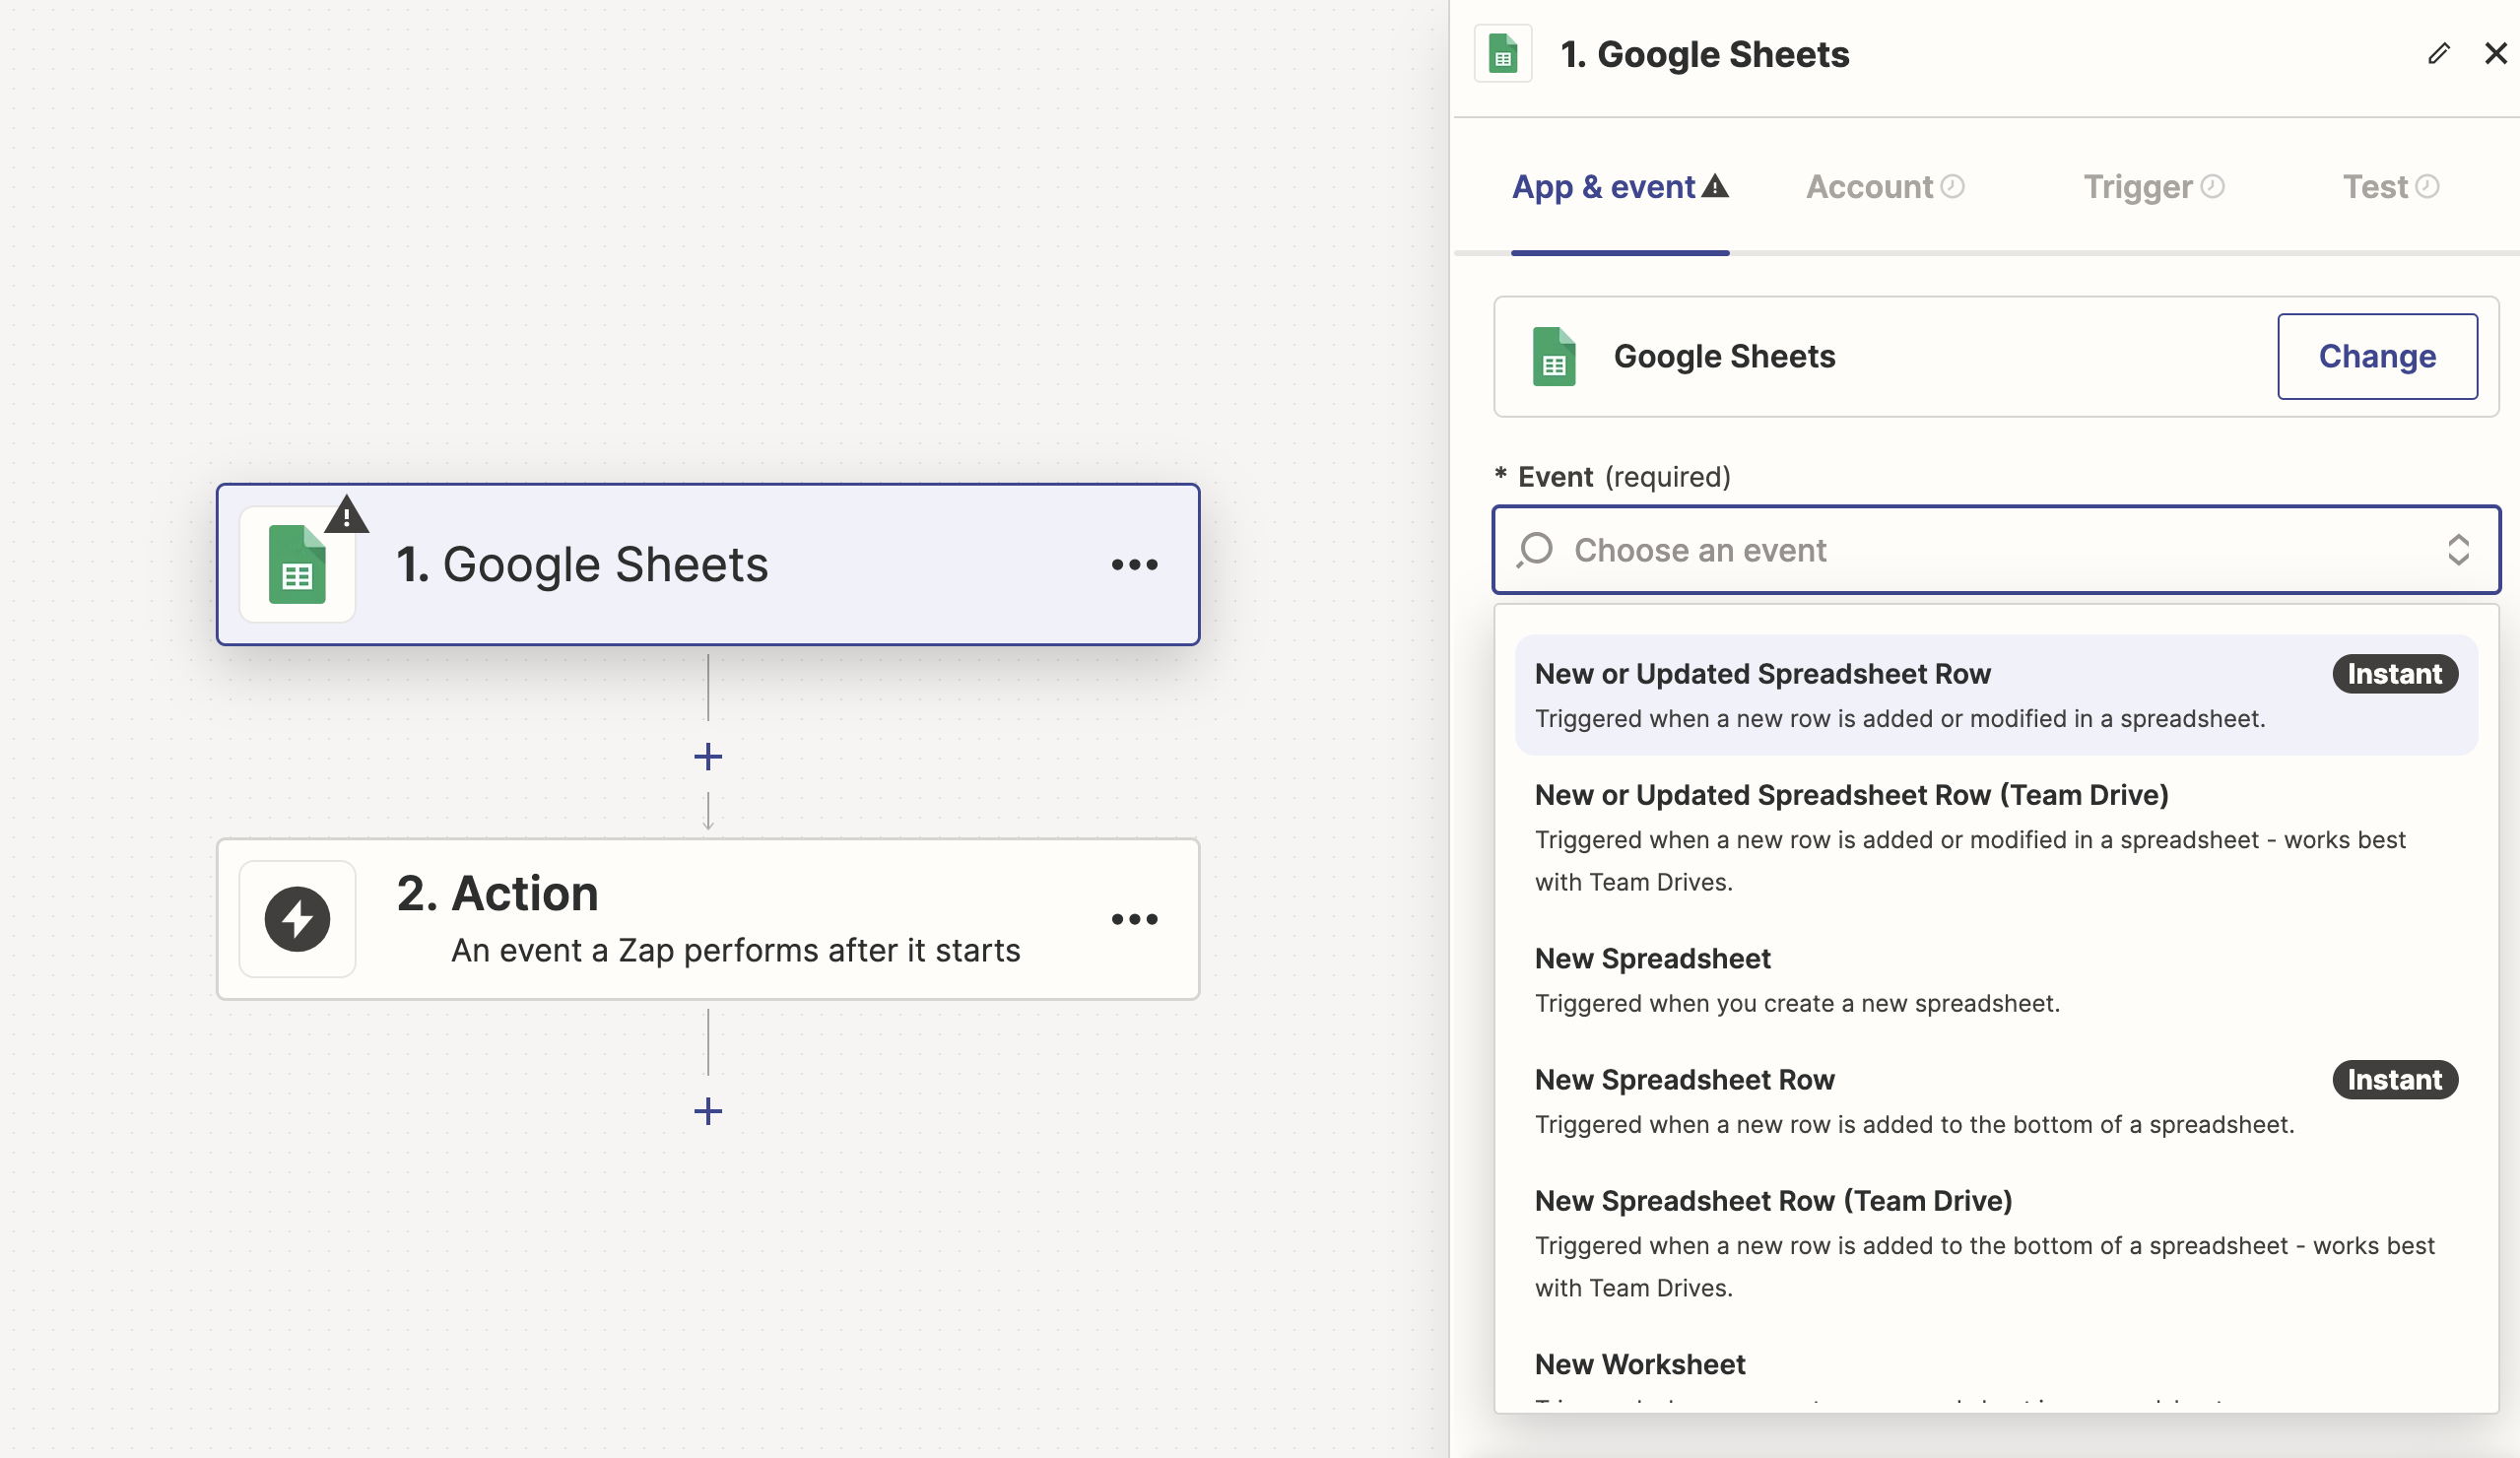 New or Updated Spreadsheet Row in Google Sheets Event